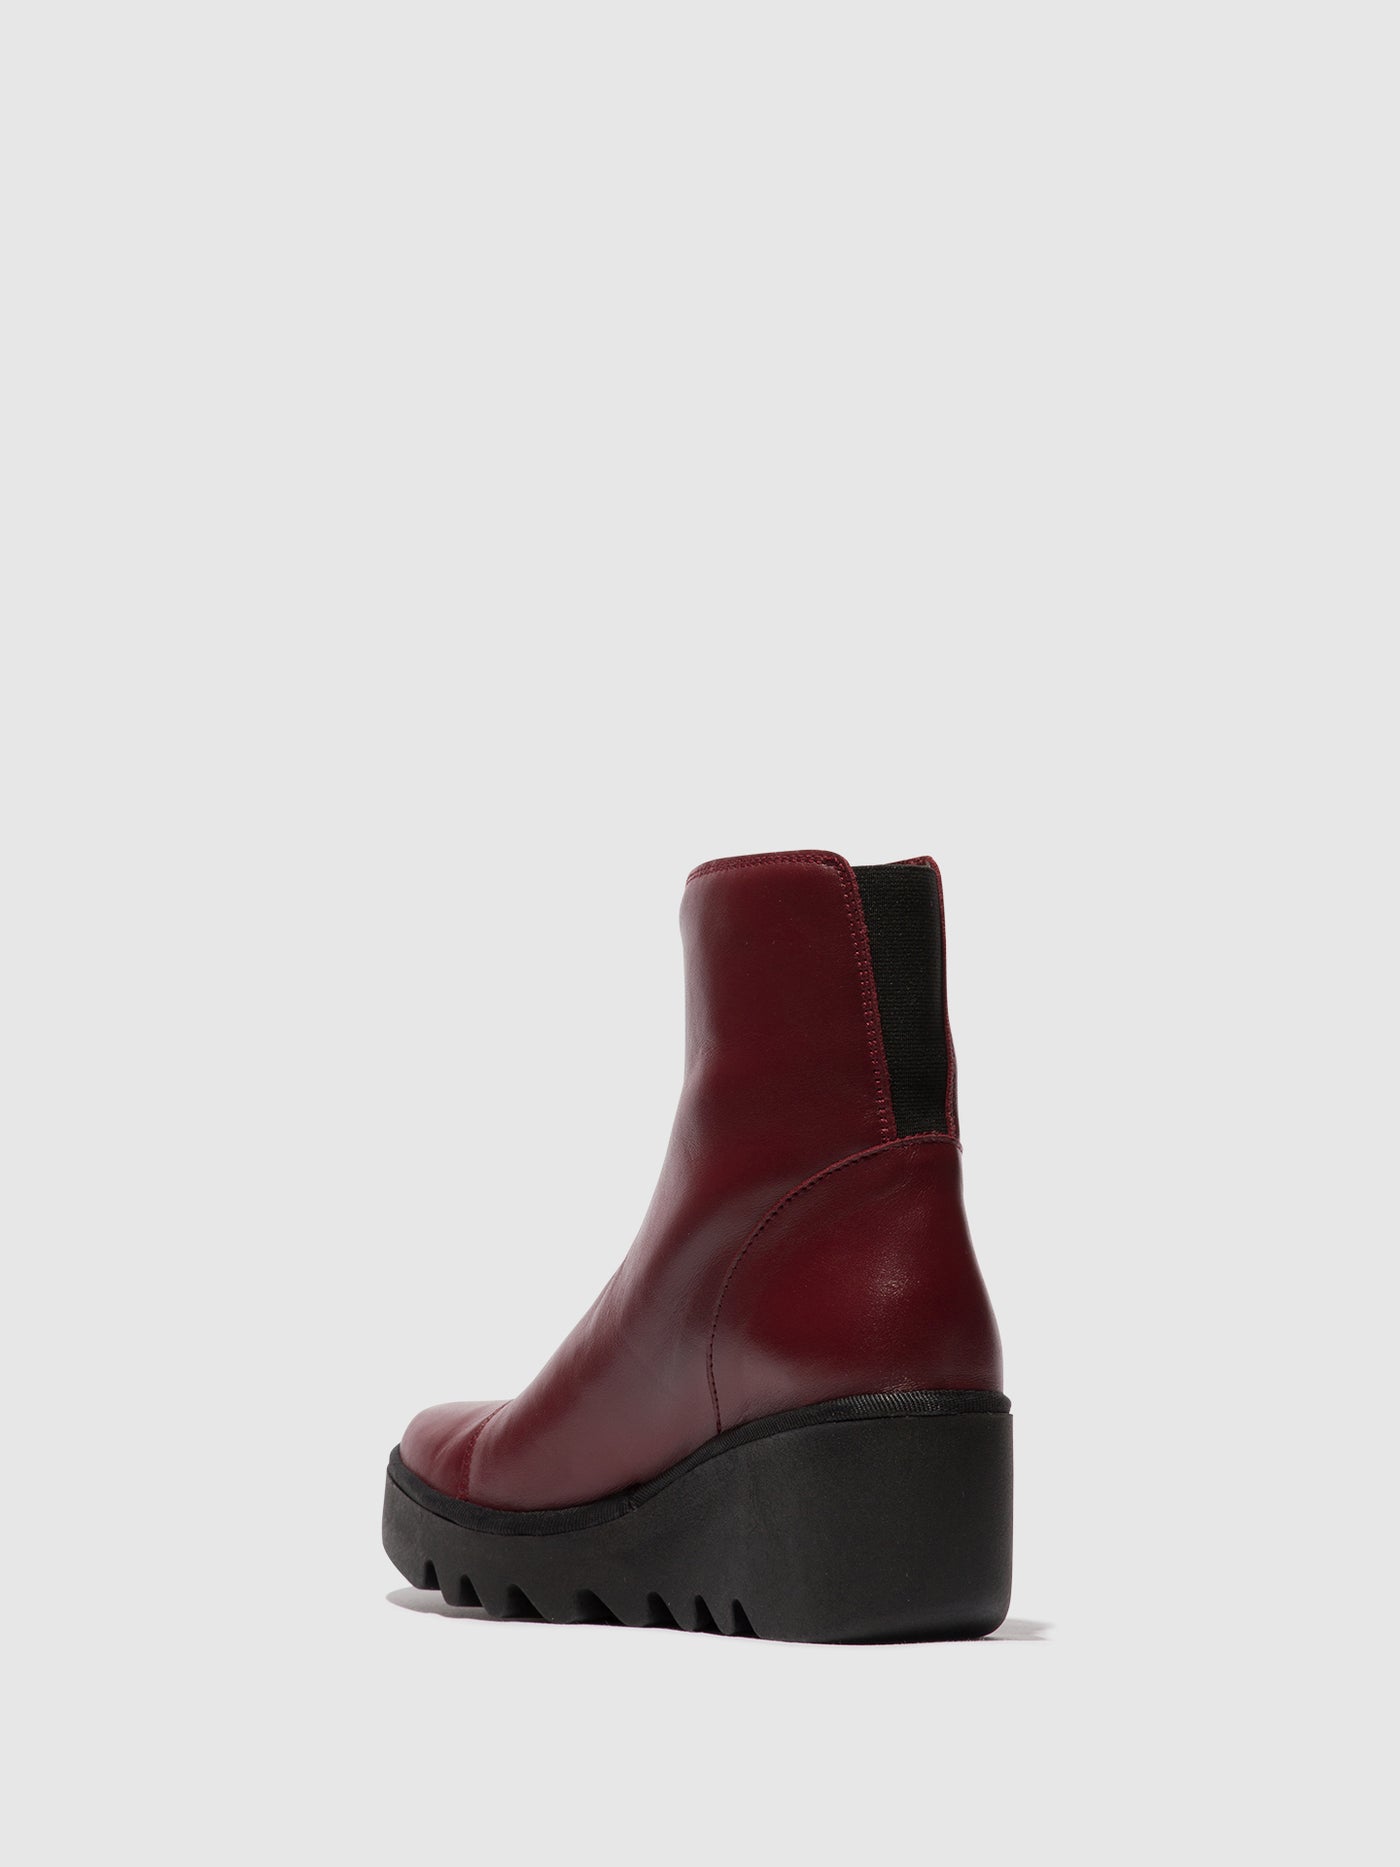 Zip Up Ankle Boots BOCE457FLY WINE